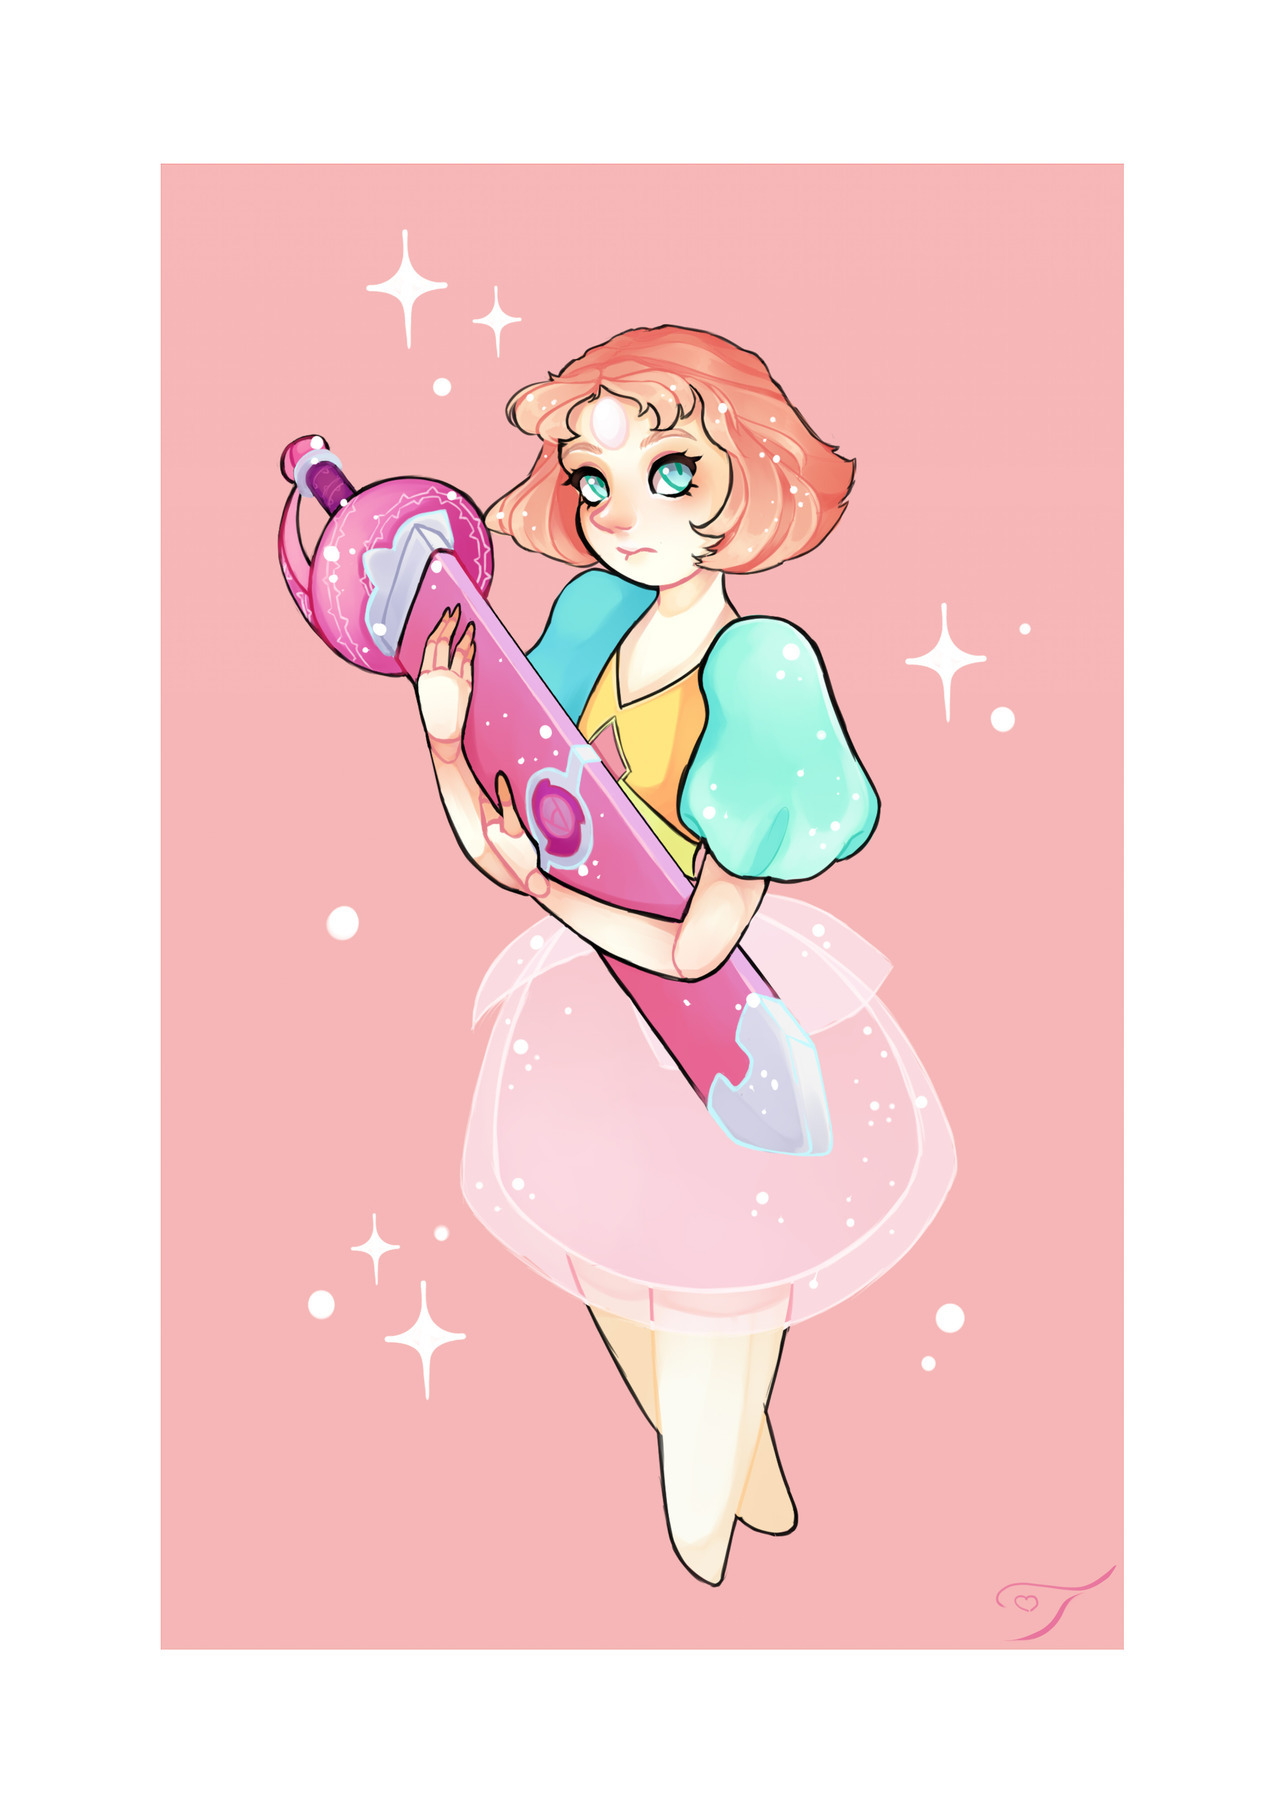 ✨ A baby Pearl ✨